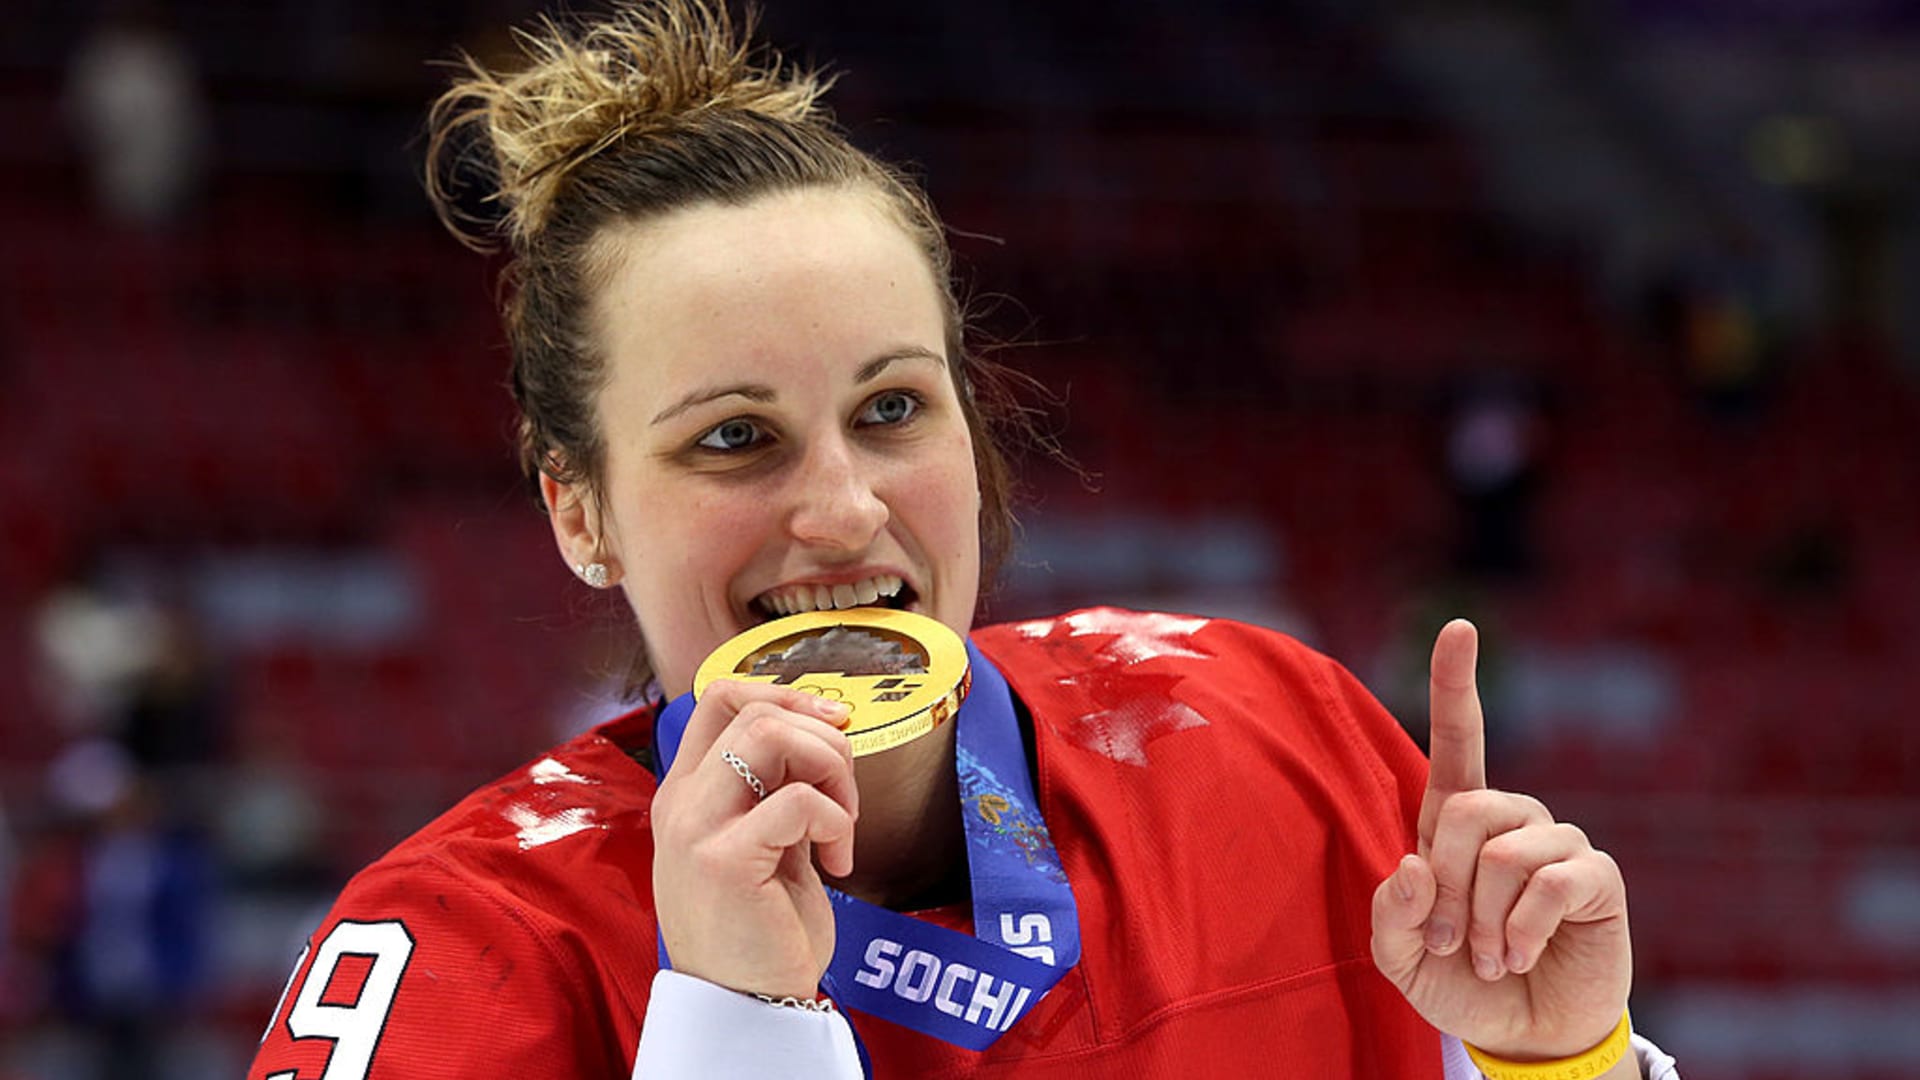 Beyond Gold Medals: Five questions for Marie-Philip Poulin - Tastet